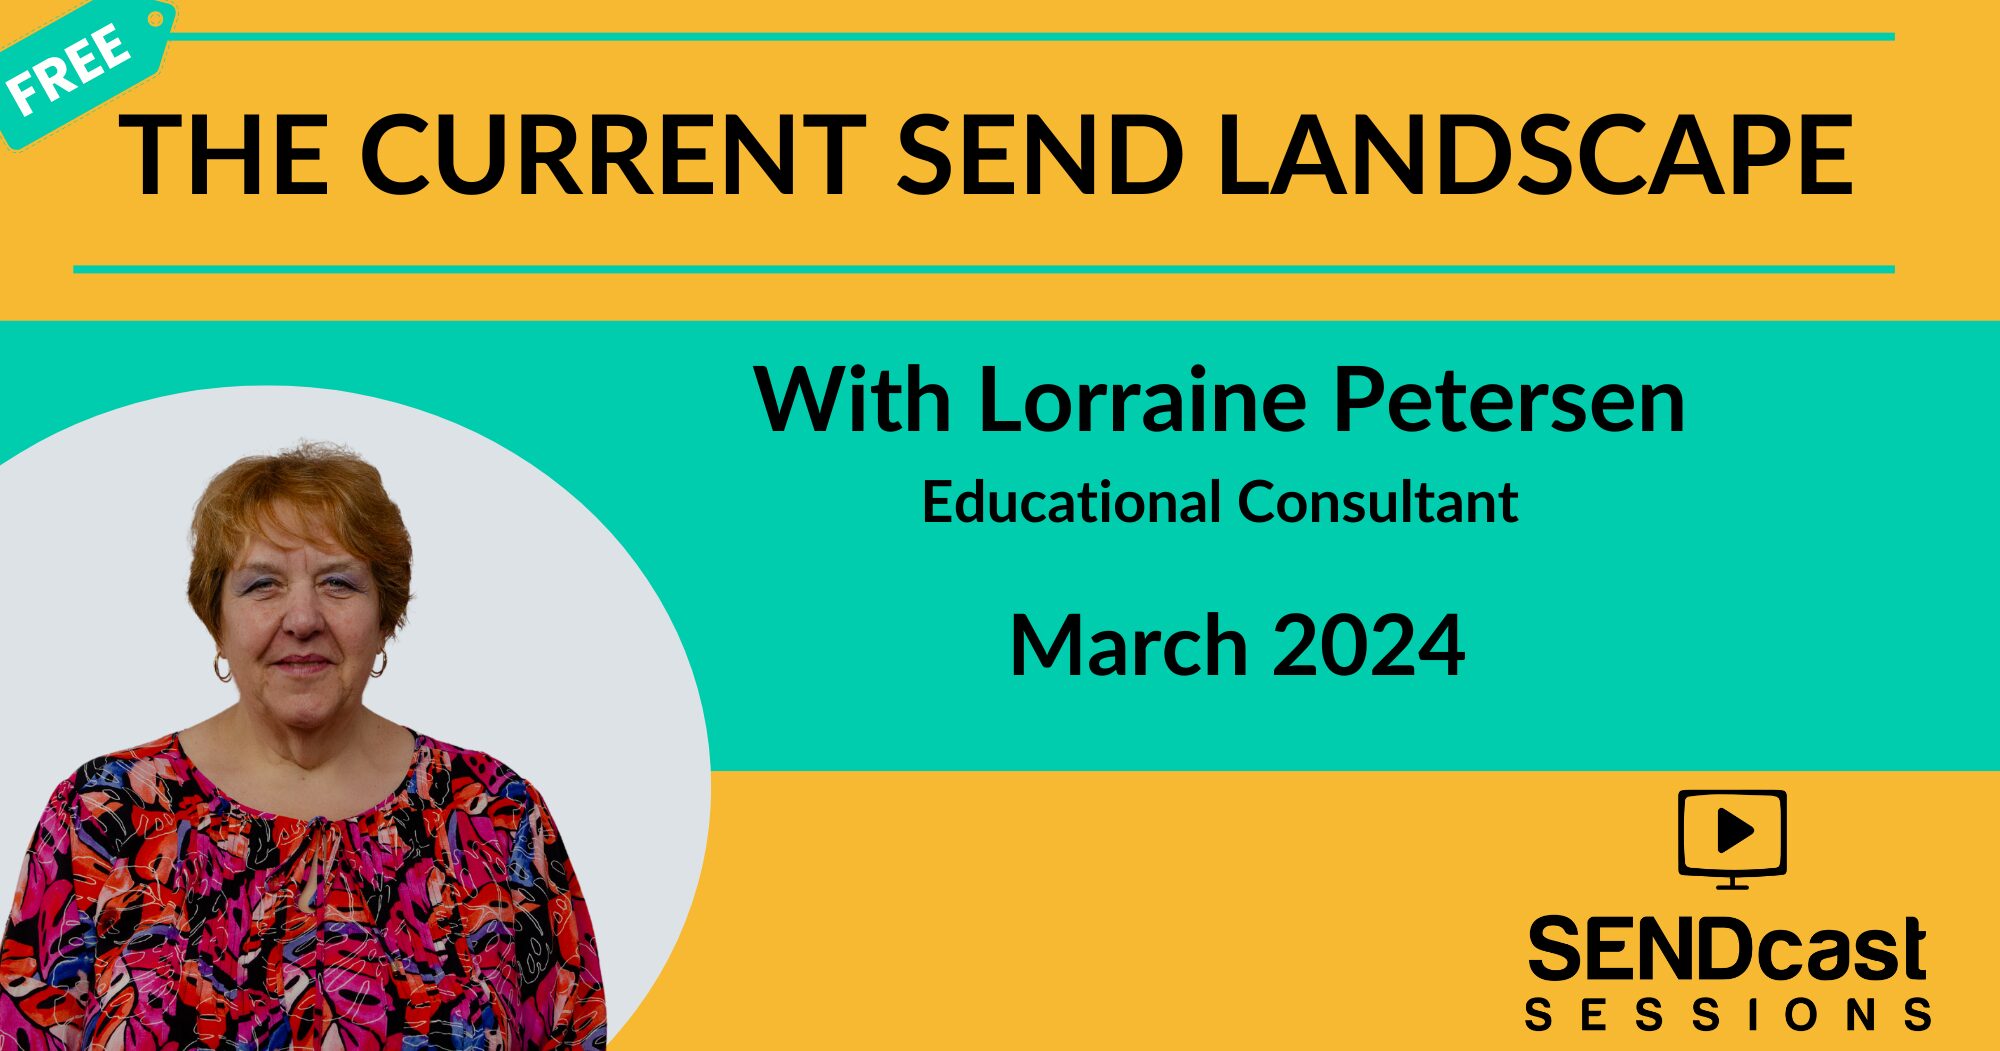 FREE SEND Briefing: The Current SEND Landscape with Lorraine Petersen